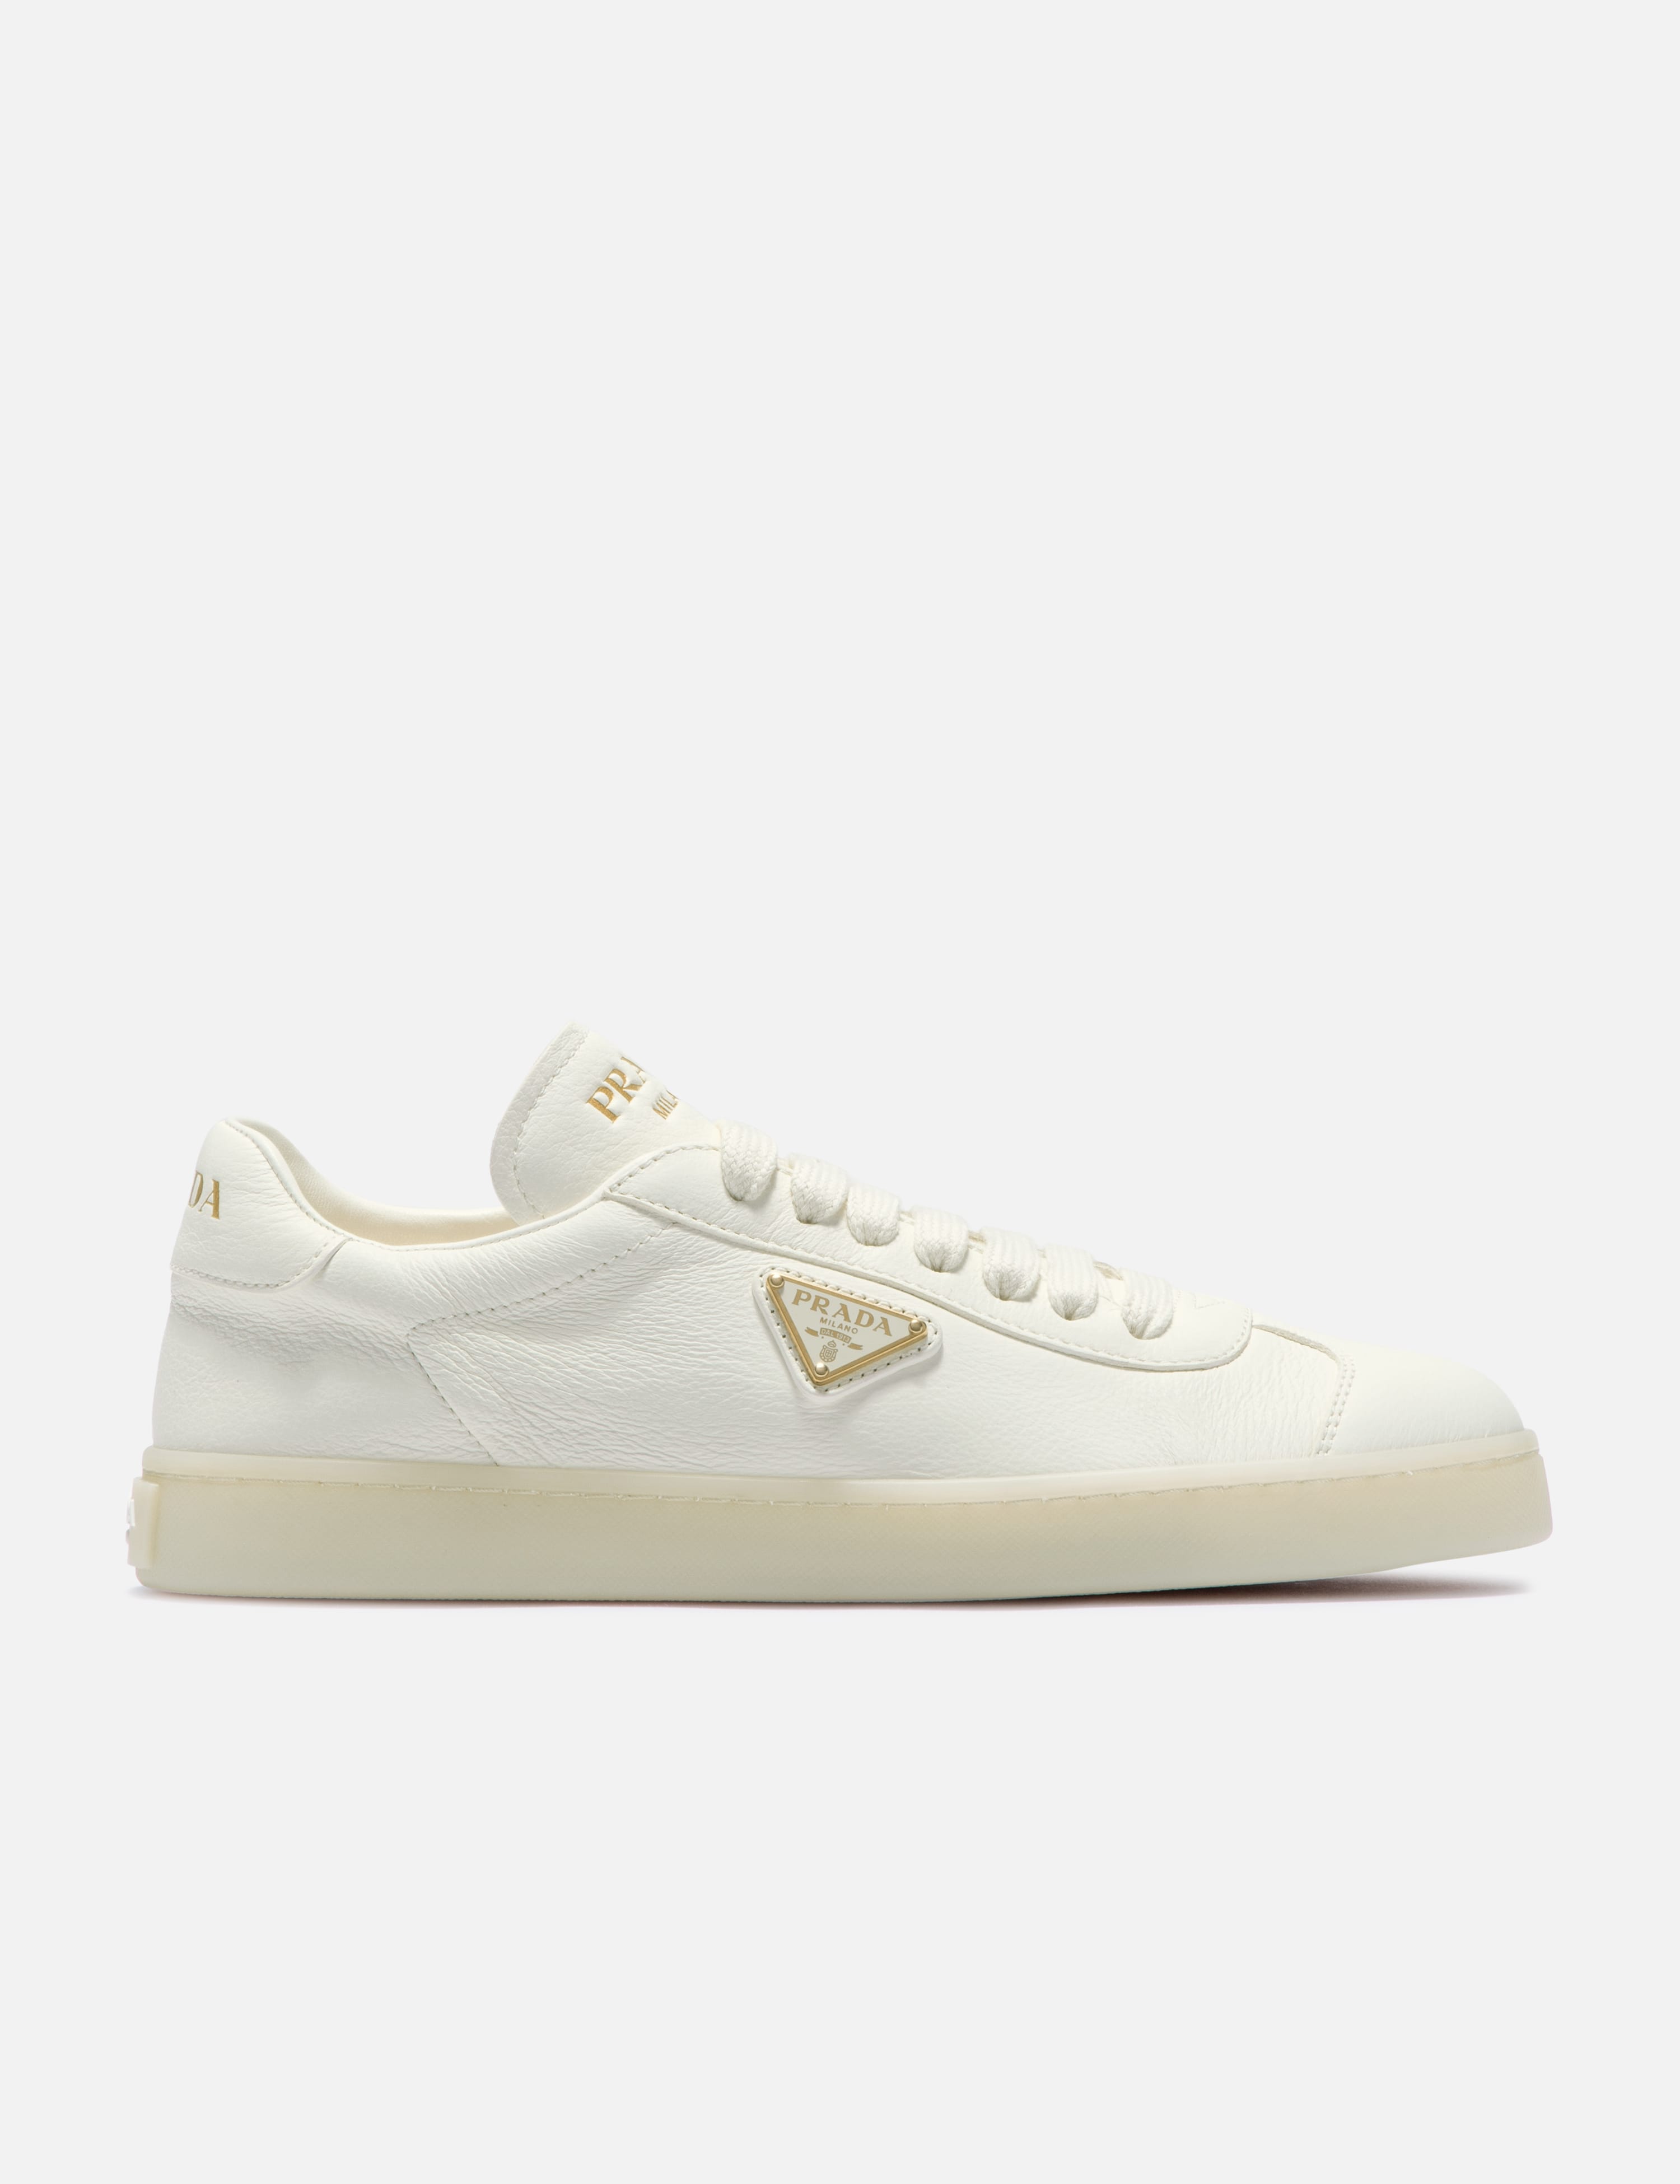 Prada Downtown leather sneakers for Women - Yellow in UAE | Level Shoes